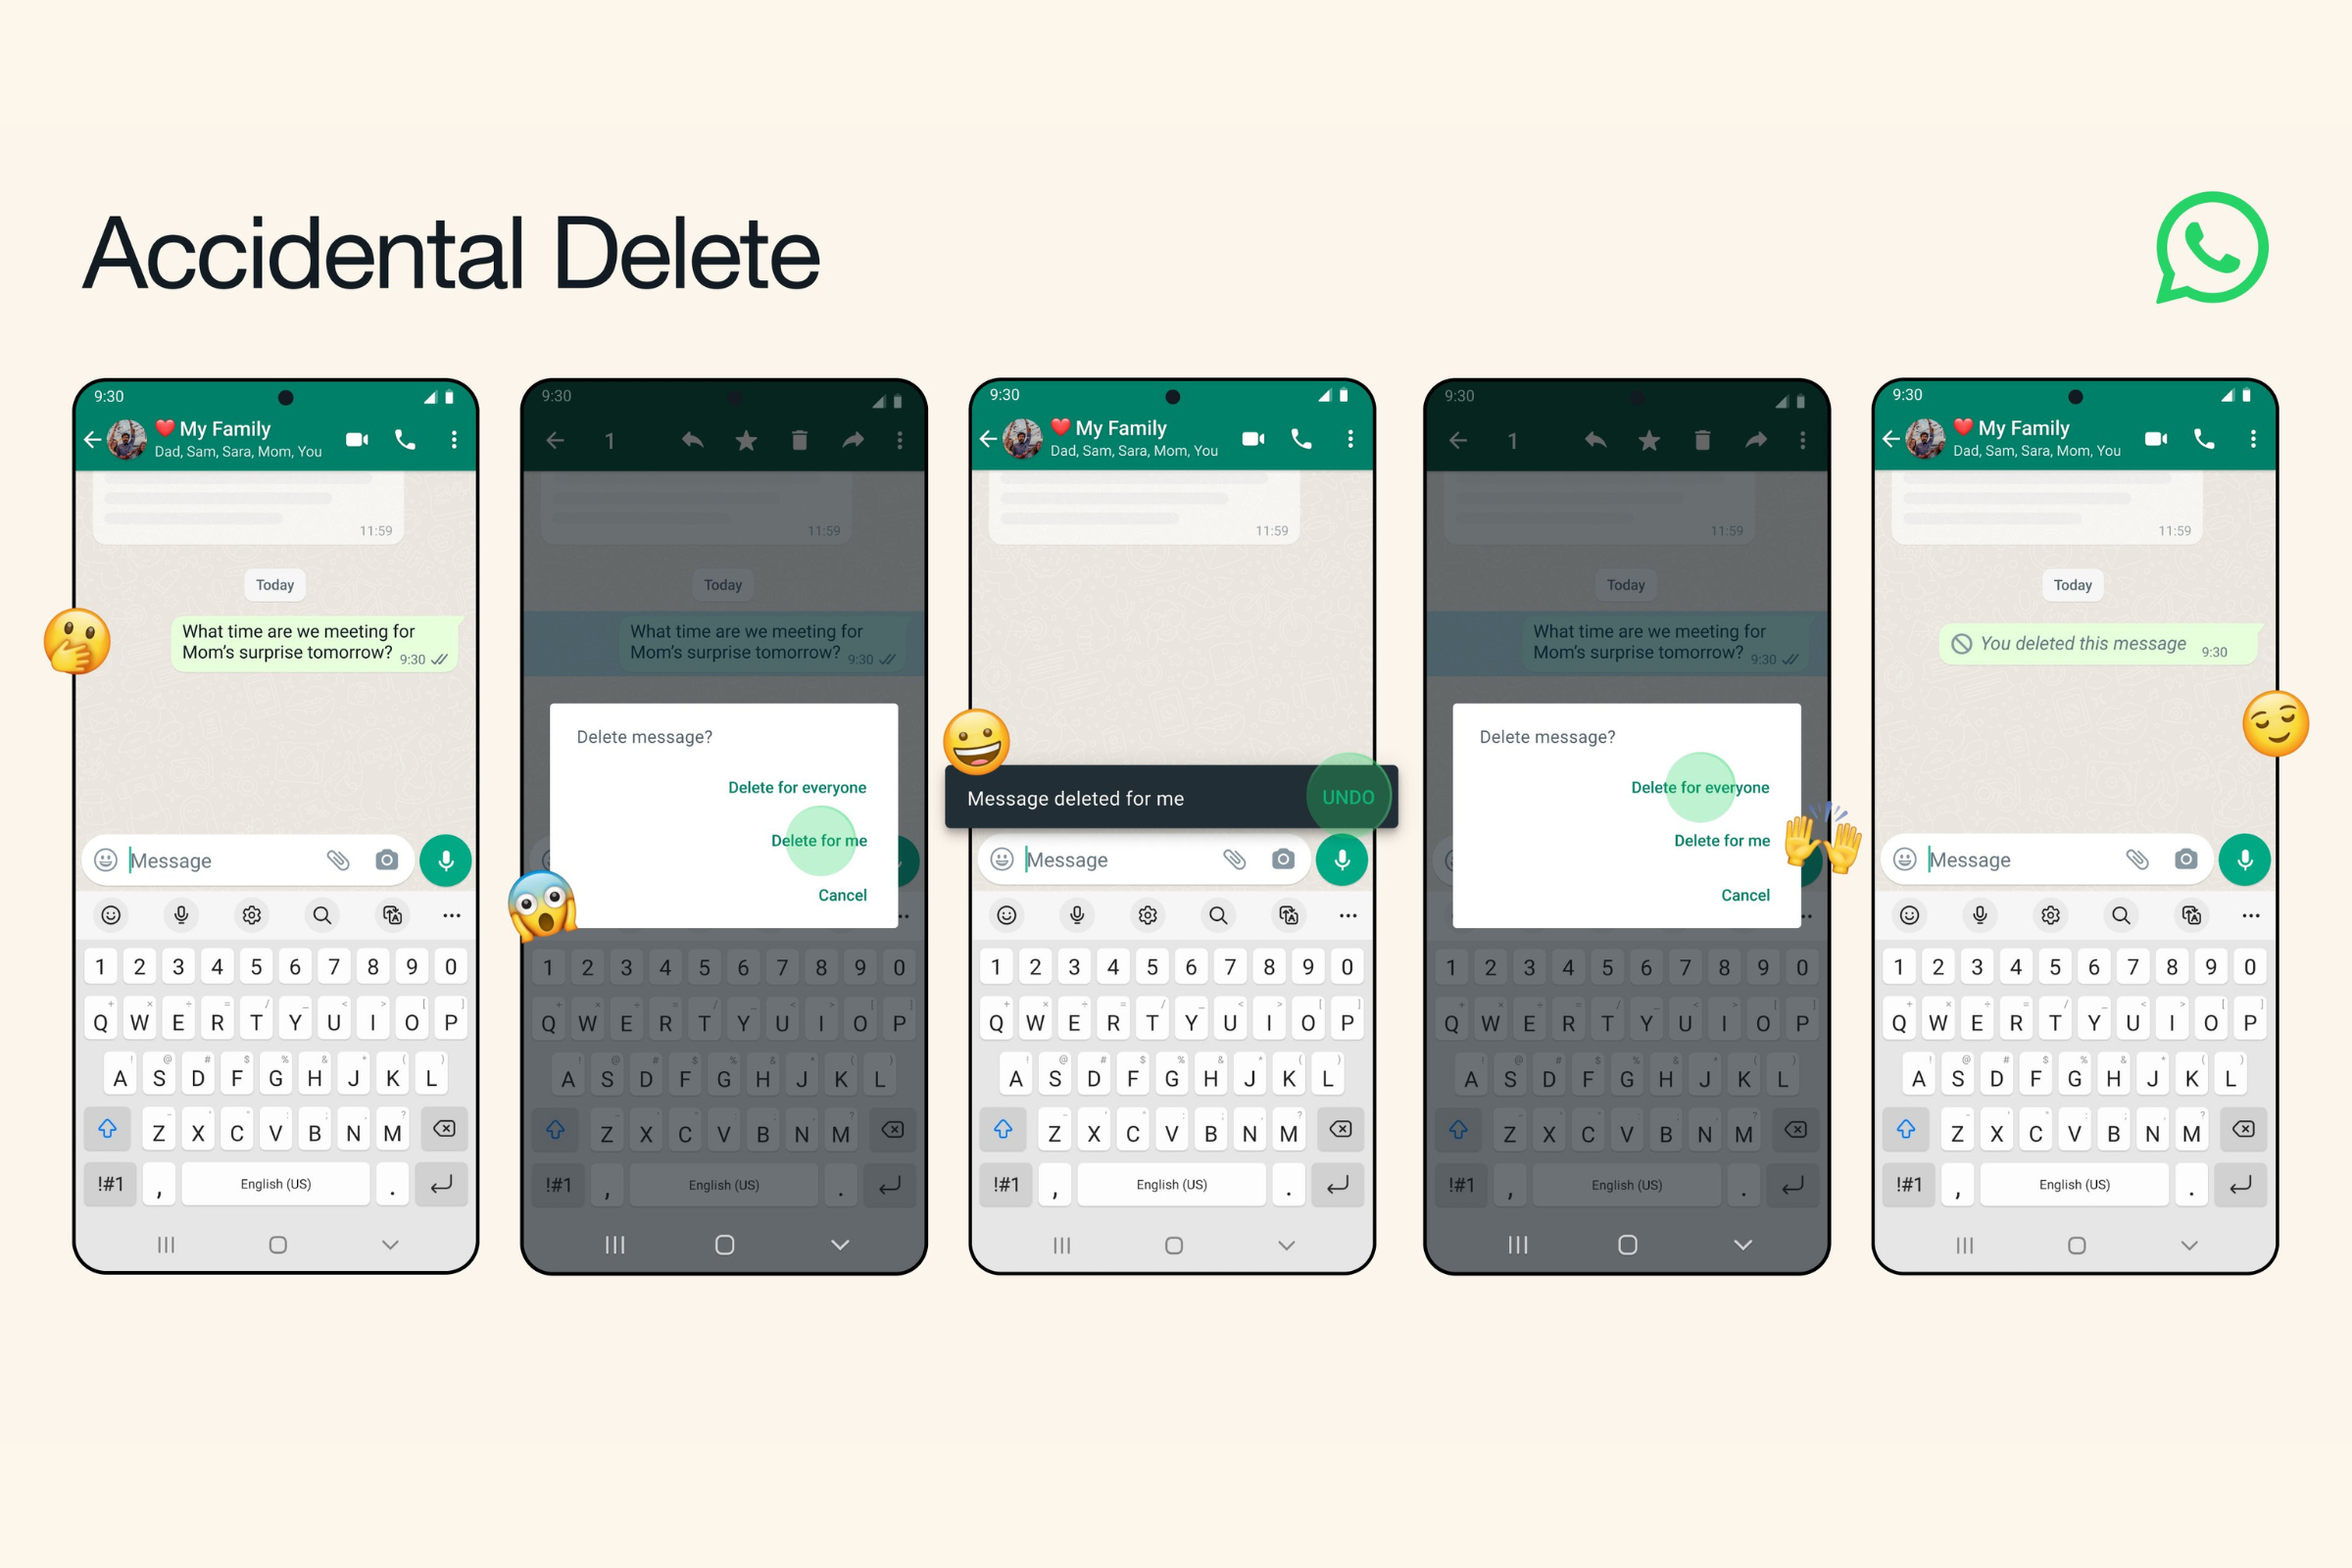 WhatsApp's useful new Undo feature gives those accidentally deleted messages a second life